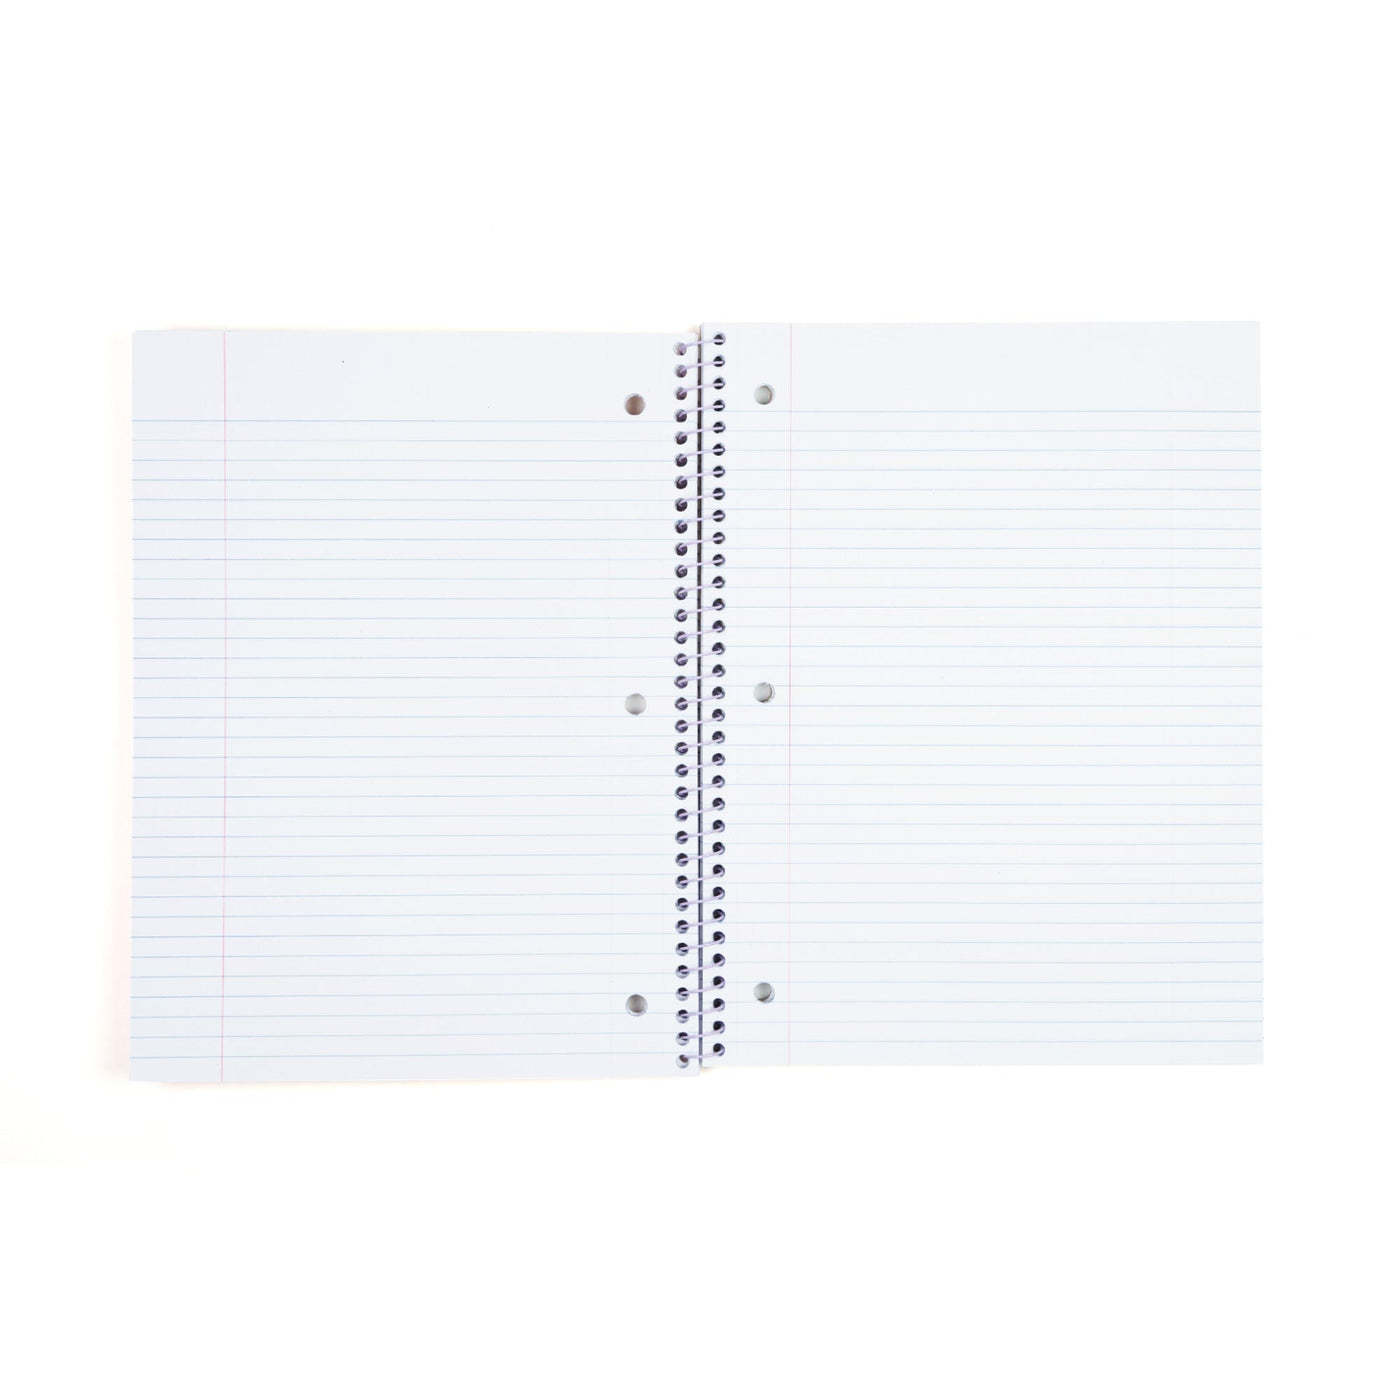 Inside of open one subject spiral notebook showing college ruled 3-ring hole punched perforated paper